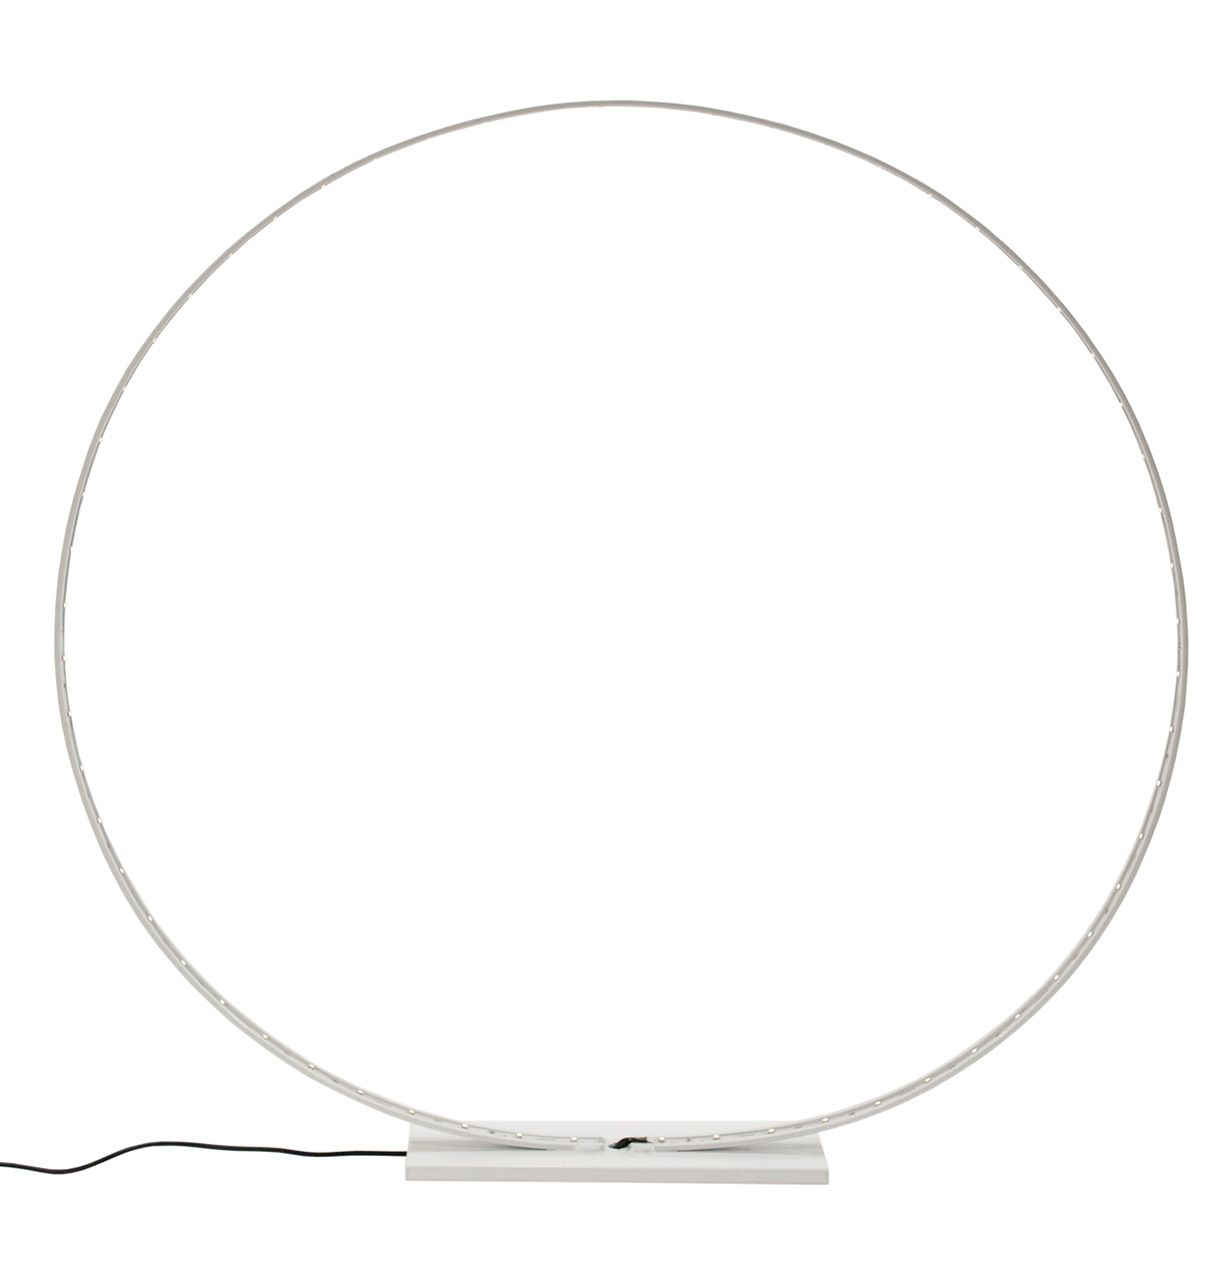 Led Lamp in White Lacquered Metal - The Ring